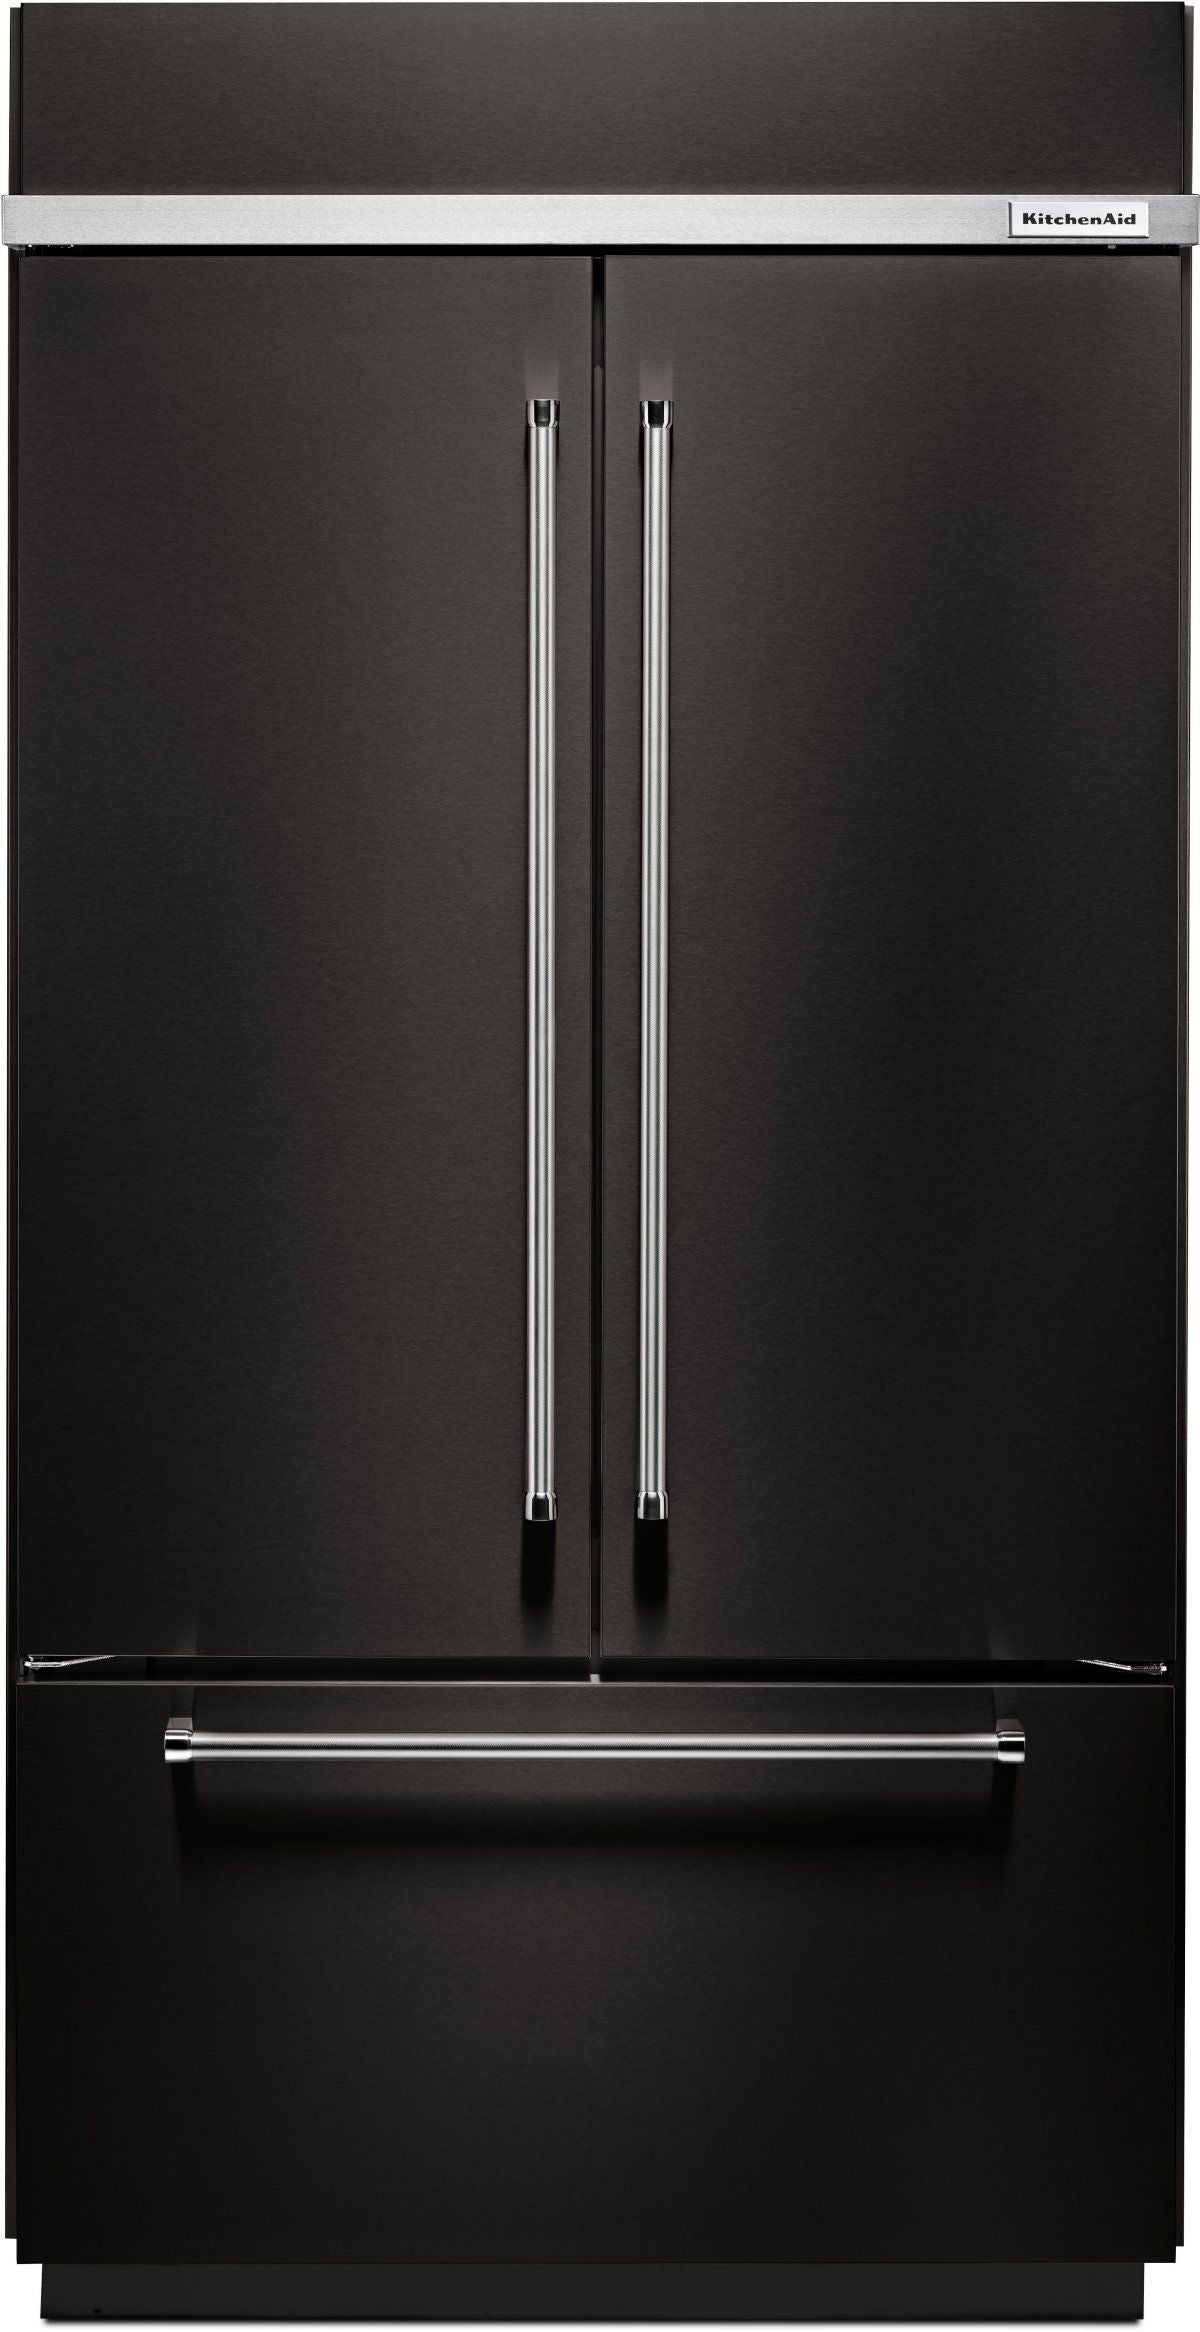 KitchenAid® 24.2 Cu. Ft. Black Stainless Steel with PrintShield Finish Built In French Door Refrigerator